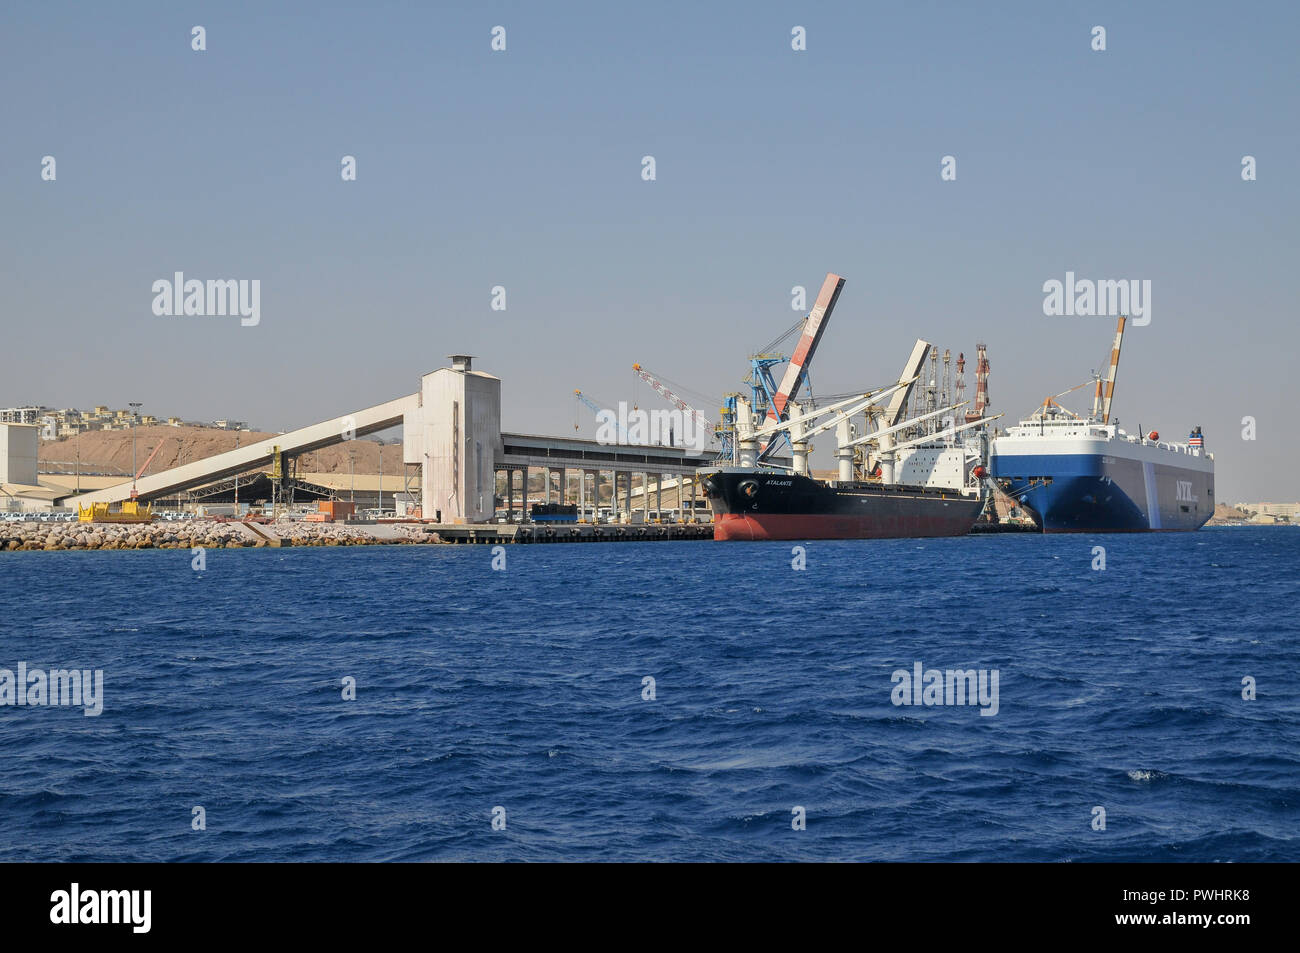 Ships at the Port of Eilat in the Red Sea, Israel Stock Photo